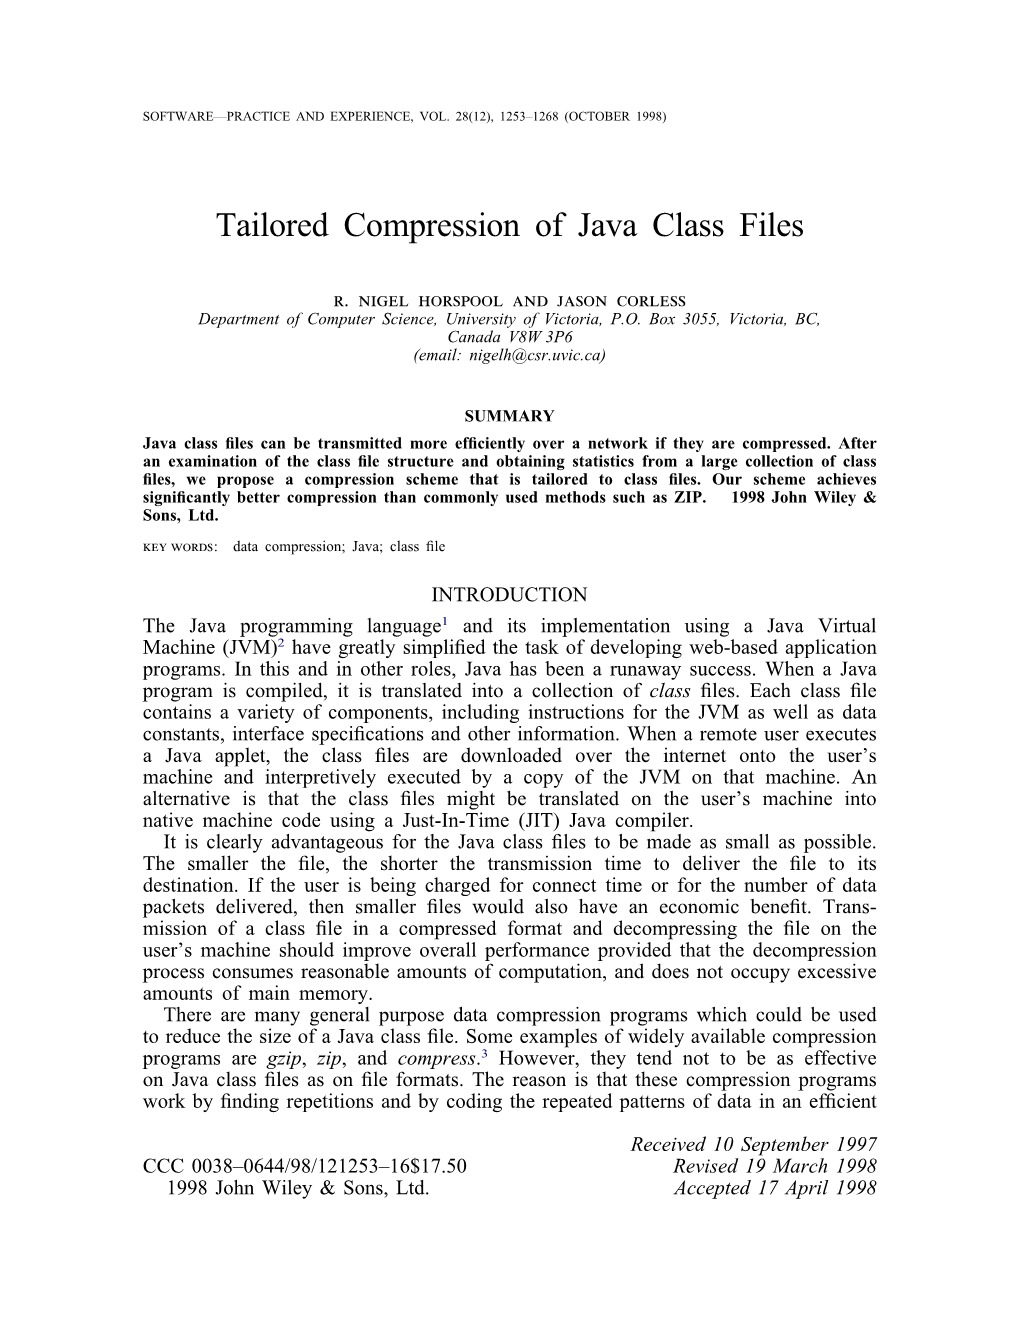 Tailored Compression of Java Class Files